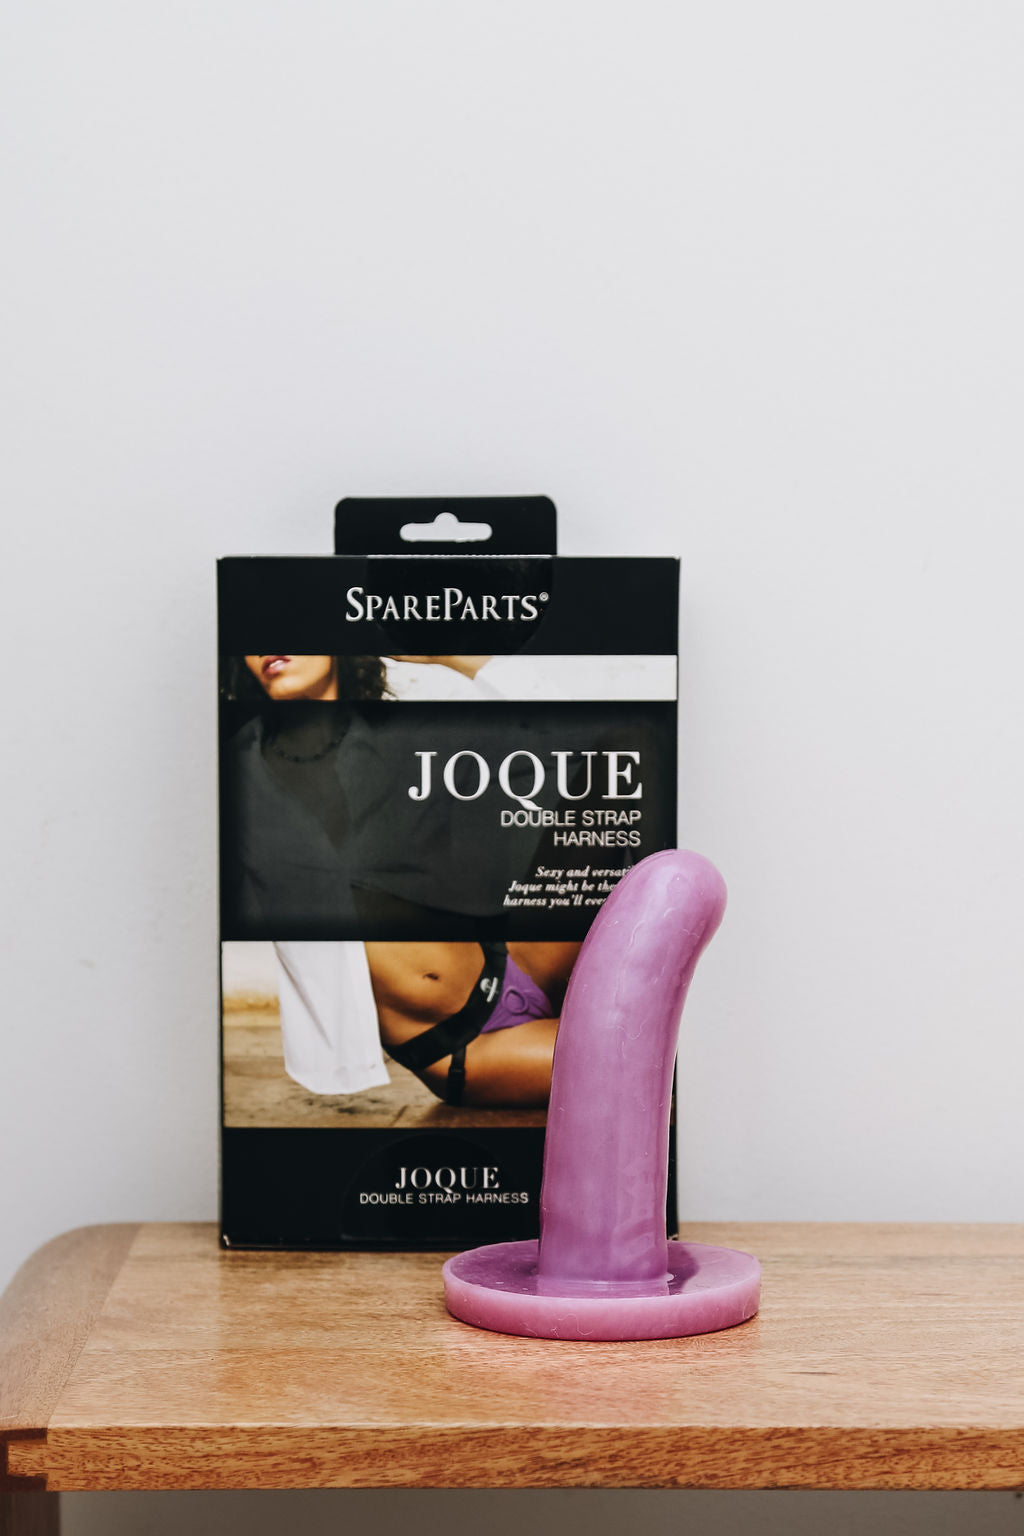 The Skyla - Pegging Strap-On Silicone Suction Dildo